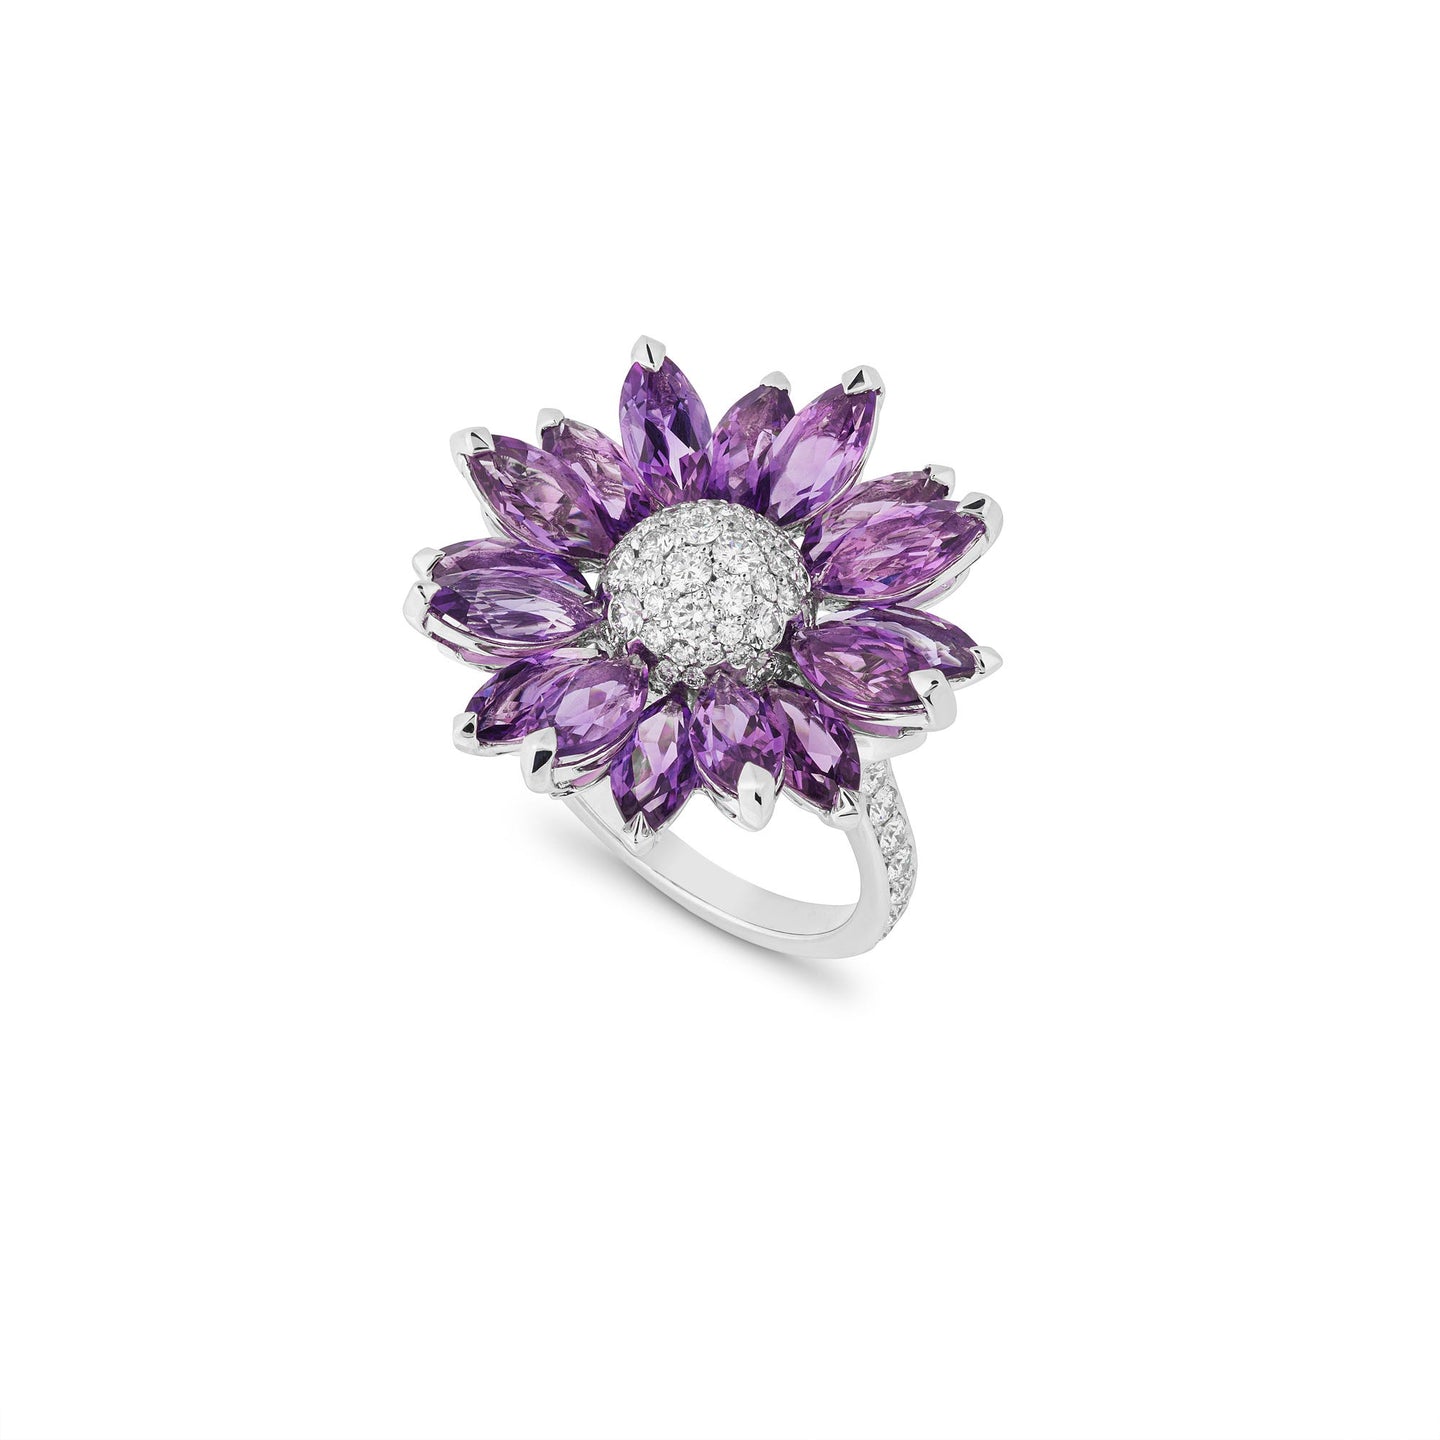 Daisy Medium Ring in 18ct White Gold with Amethyst and Diamonds